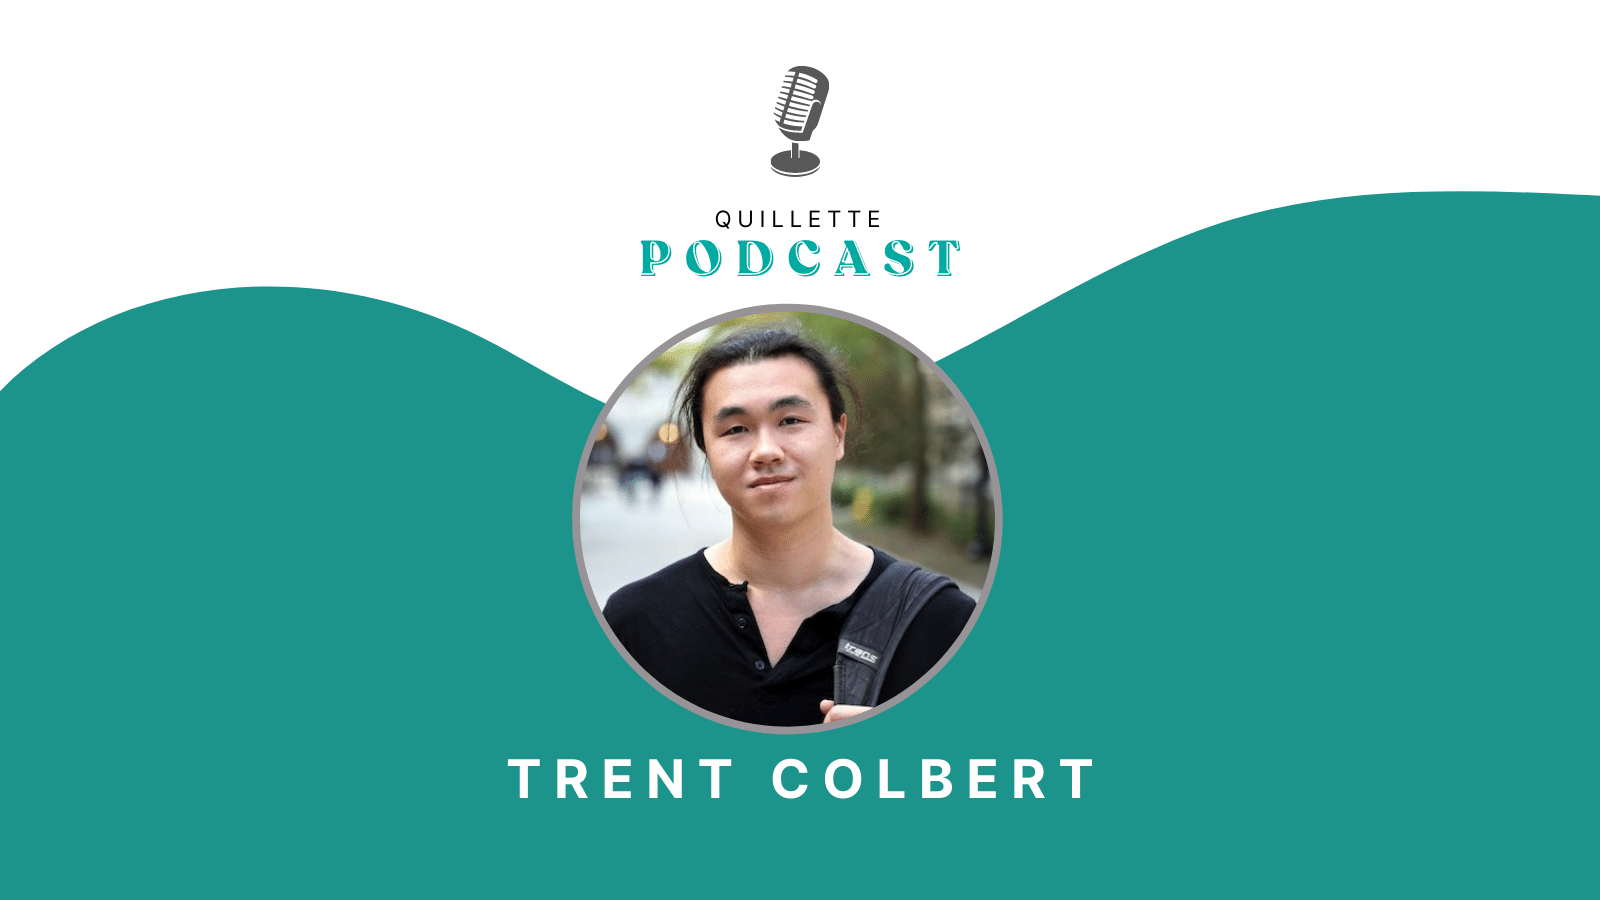 Podcast #174: Trent Colbert Turns the Tables on Yale Law School’s Kafkaesque Diversity Department